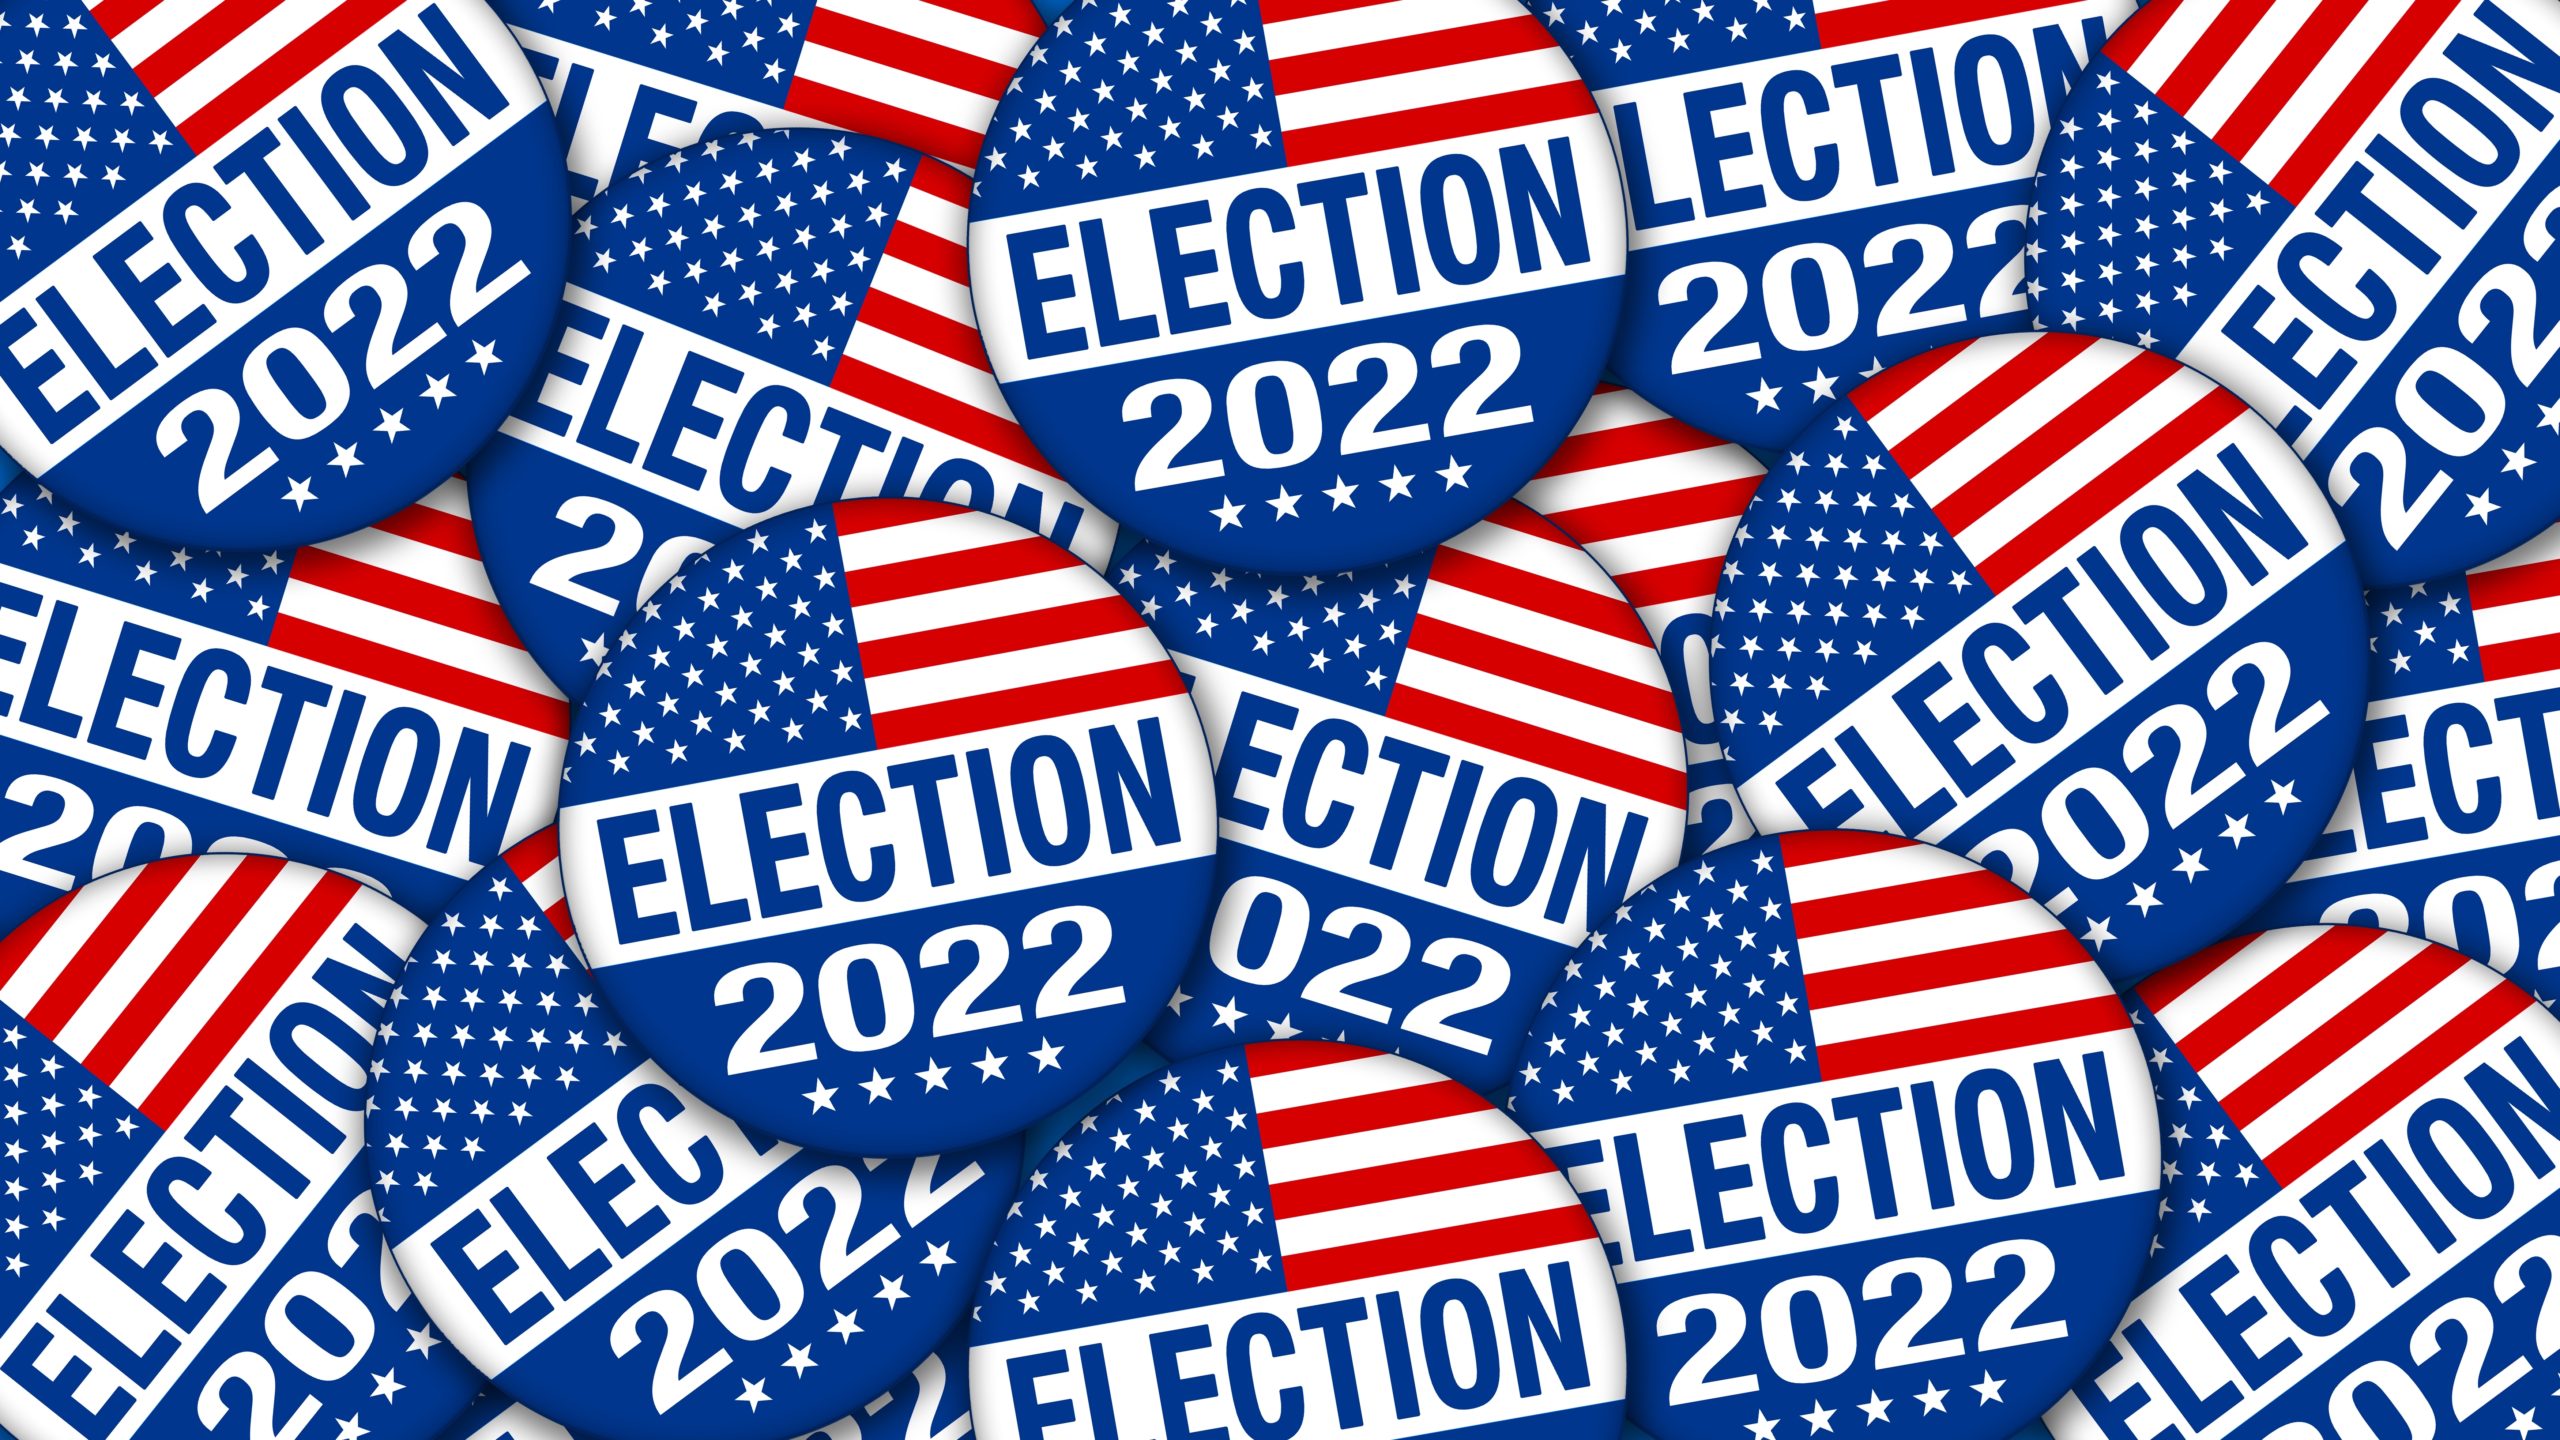 A graphic of multiple election 2022 pins on the entire image.